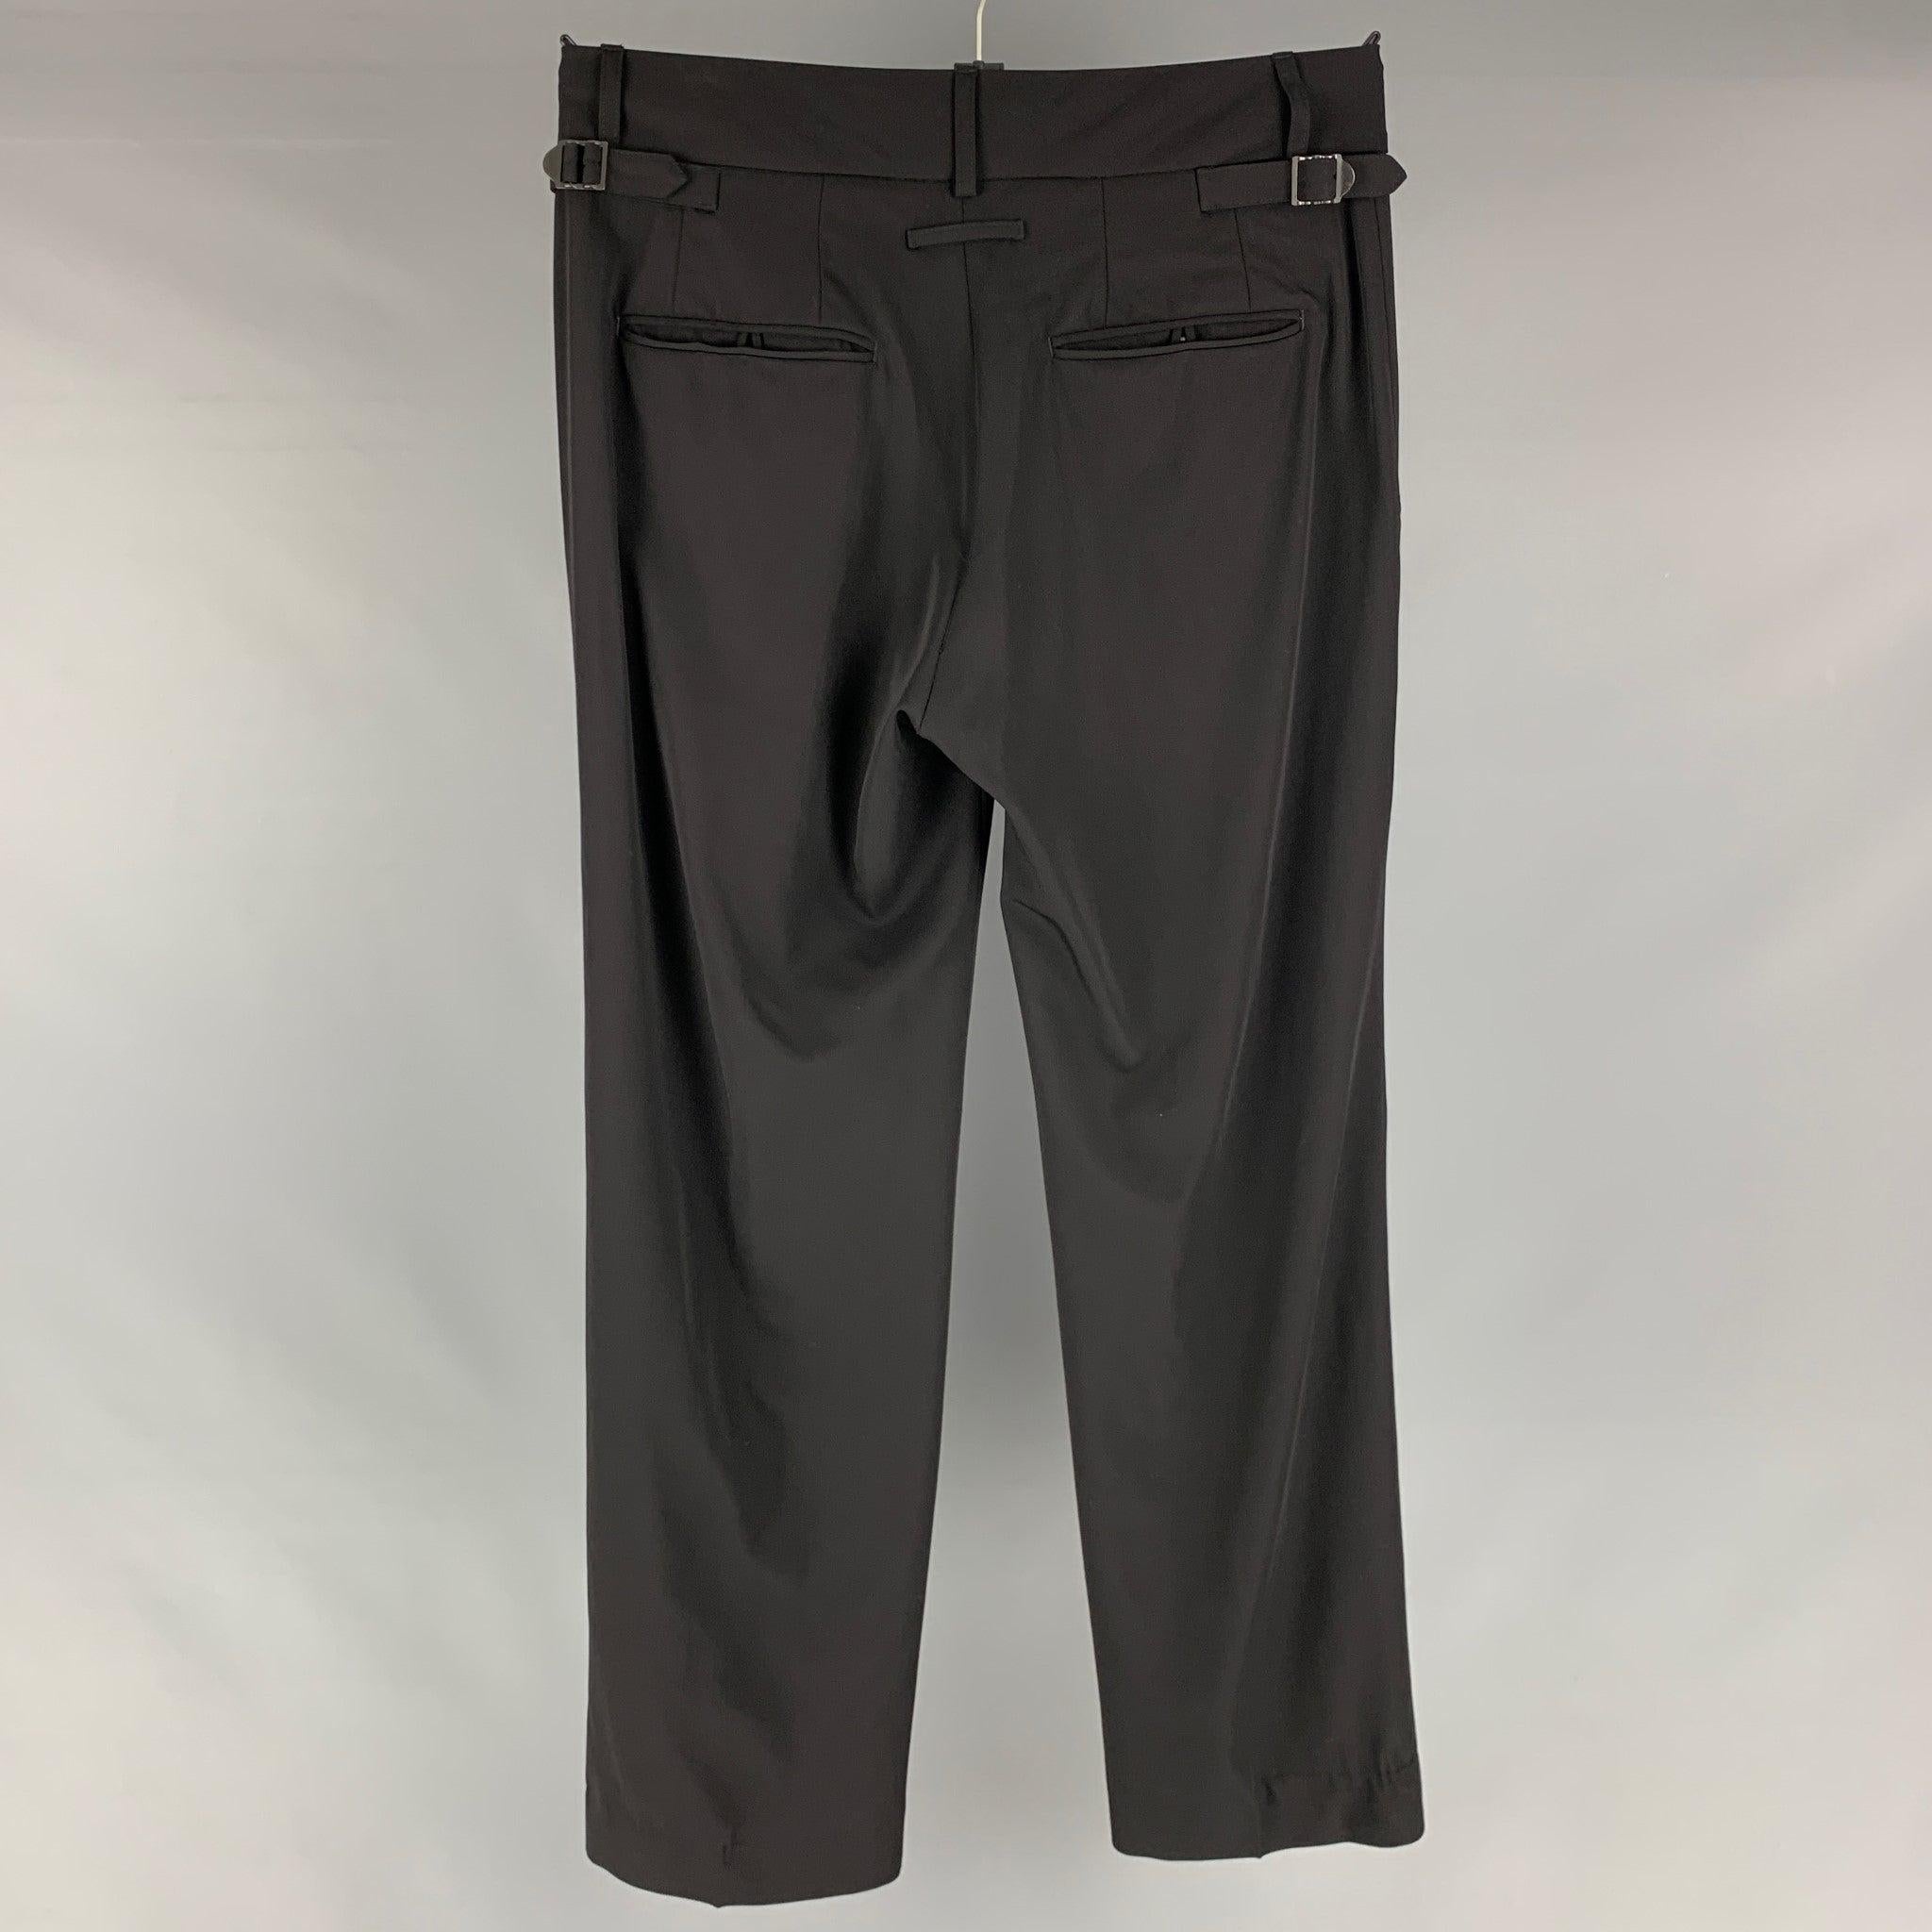 JEAN PAUL GAULTIER trousers comes in a black wool featuring side tabs and a button up closure. Made in Italy.Very Good Pre-Owned Condition. 

Marked:  32 

Measurements: 
 Waist: 32 inches Rise: 10 inches Inseam: 30 inches 
 

 
 
 
Reference: